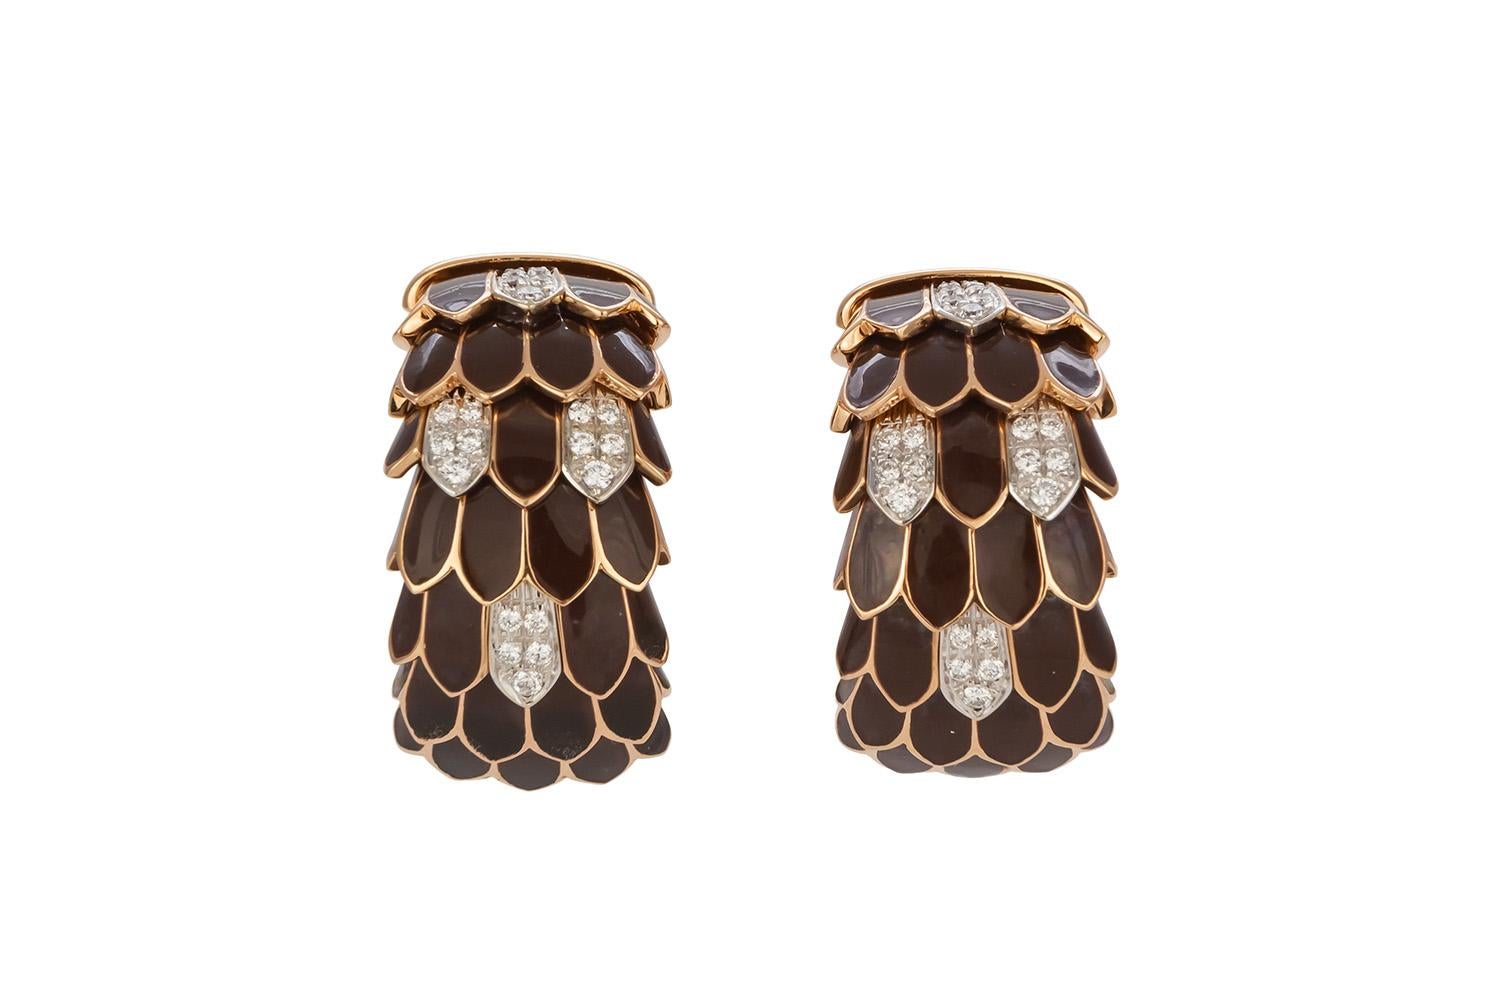 We are pleased to offer these Roberto Coin 18k Yellow Gold Diamond & Enamel Animalier Feather Huggie Earrings. These finely crafted earrings feature a feather or scale motif with dark brown enamel and an estimated 0.66ctw F-G/VVS-VS round brilliant